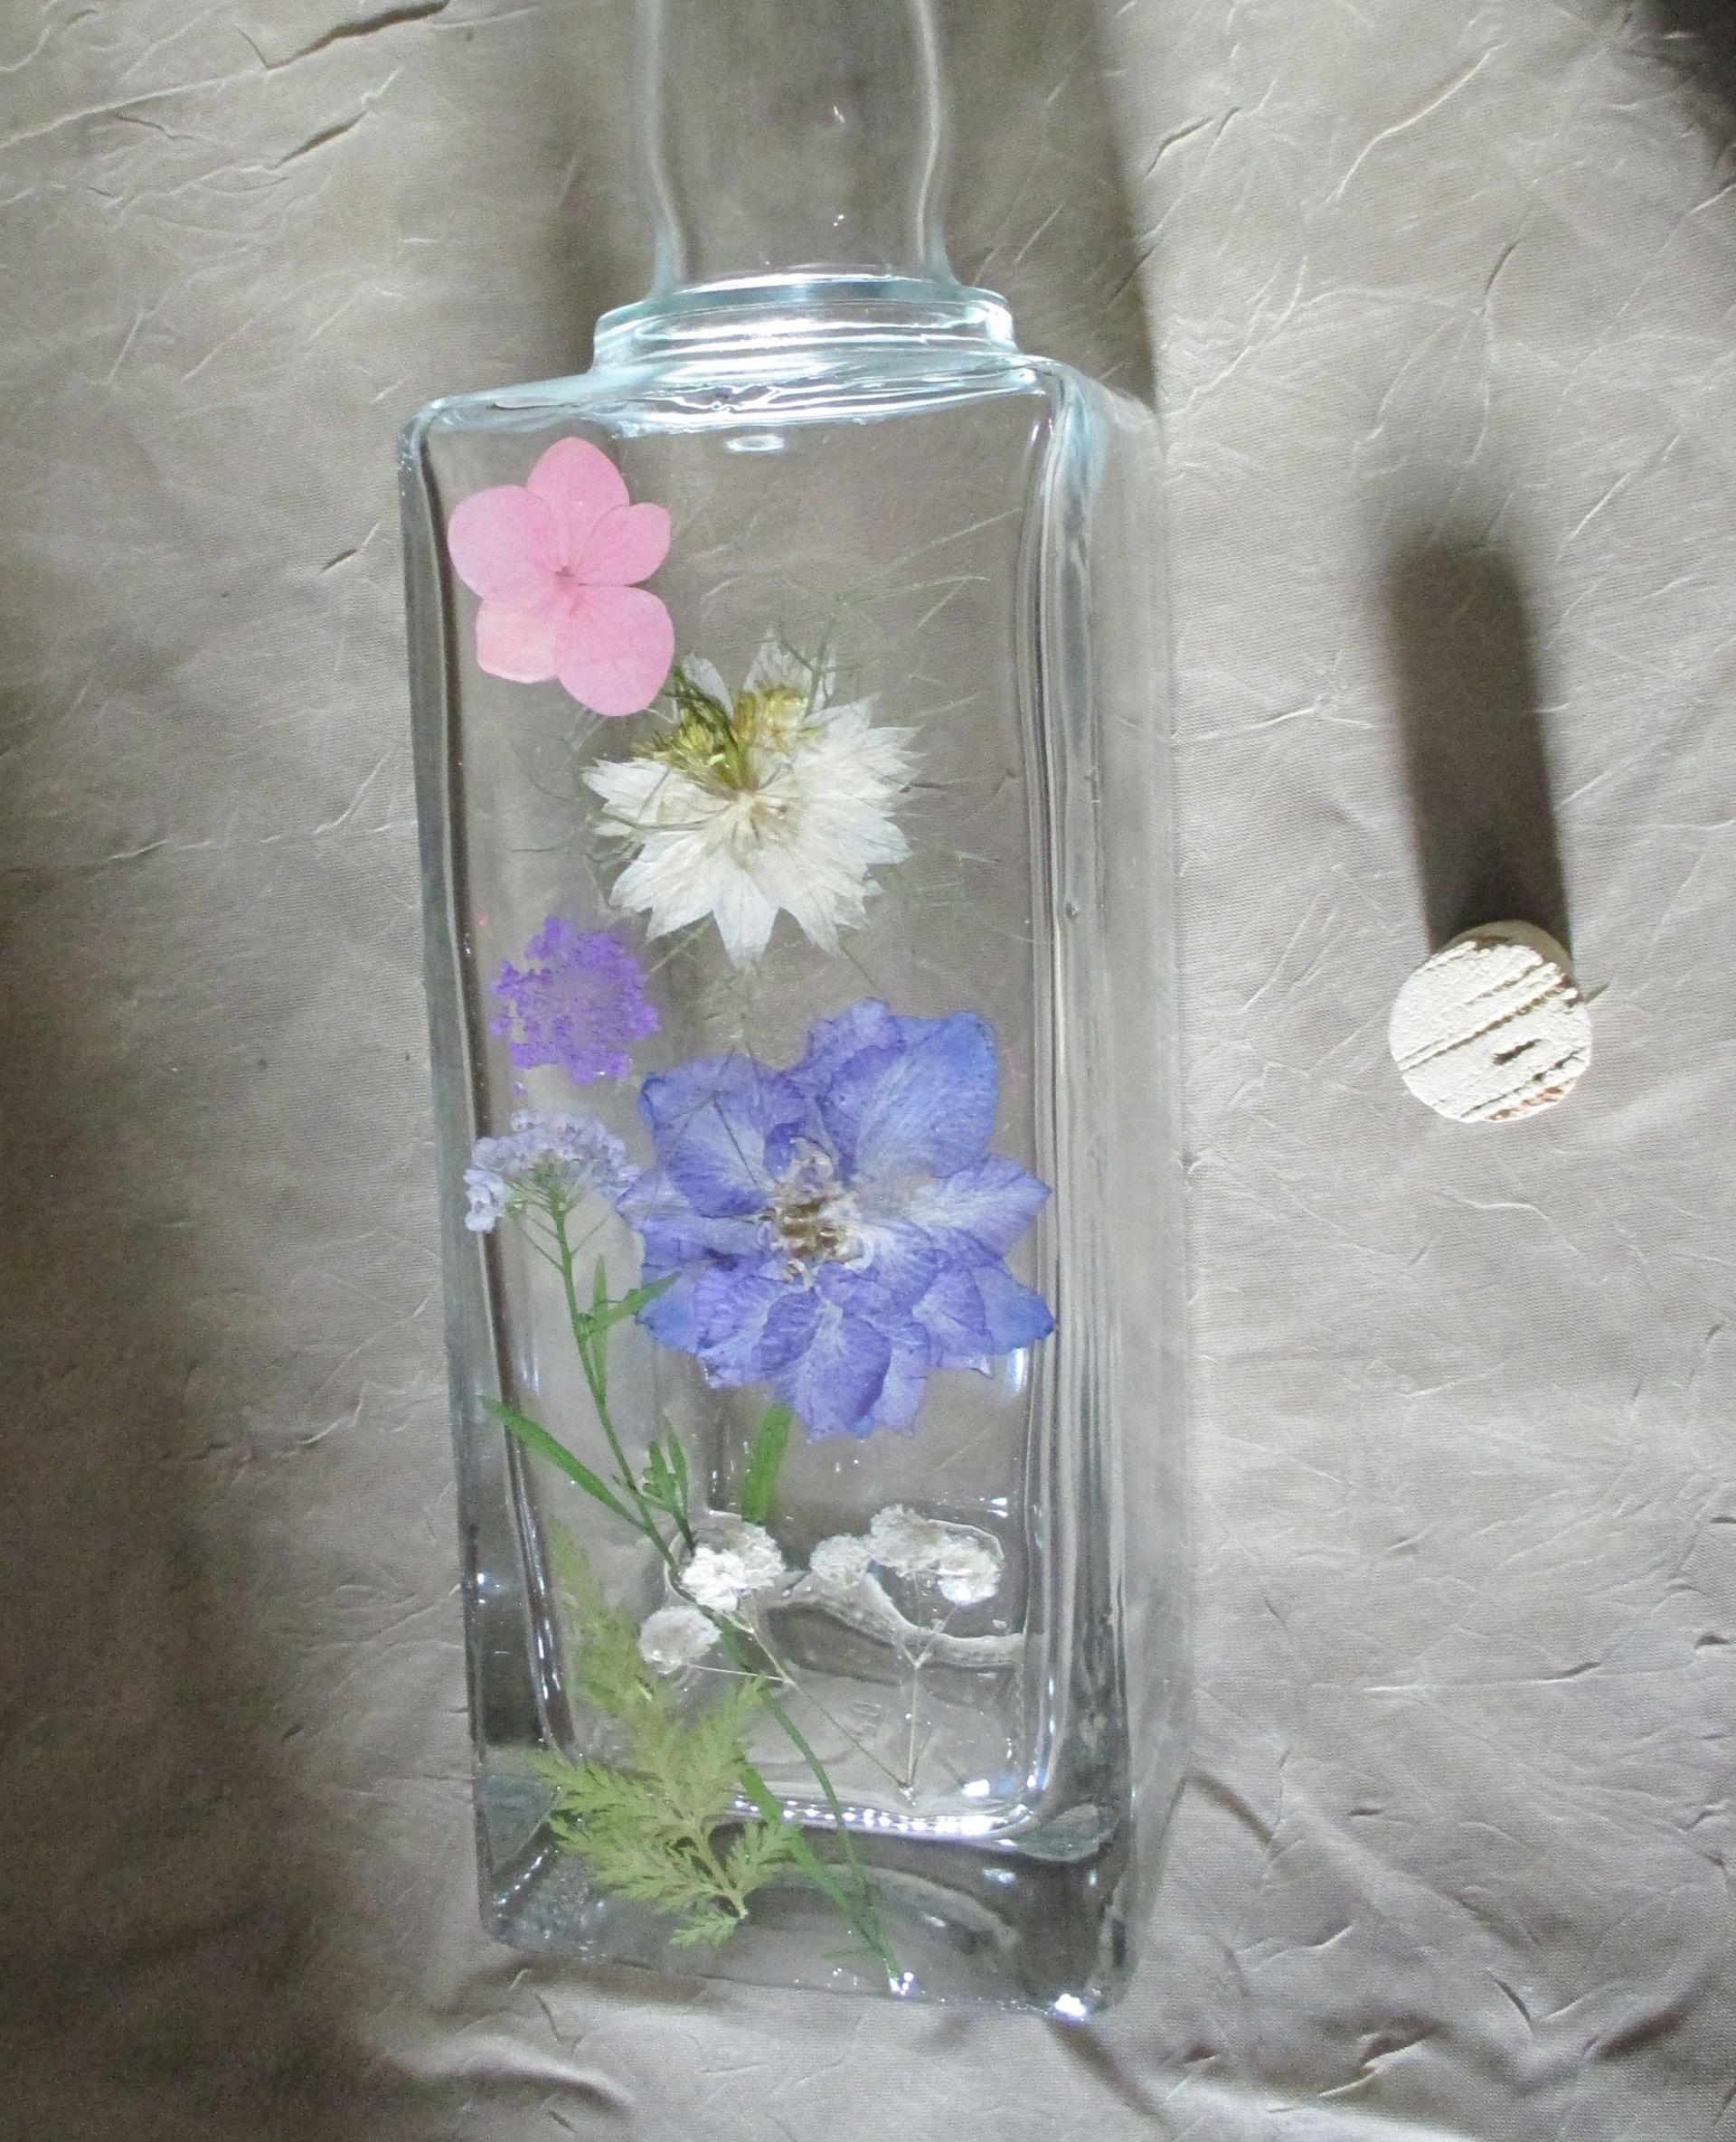 Floral Bottles, Large 17oz Corked Bottle - Glass Bottles with Epoxy, Flowers in Resin